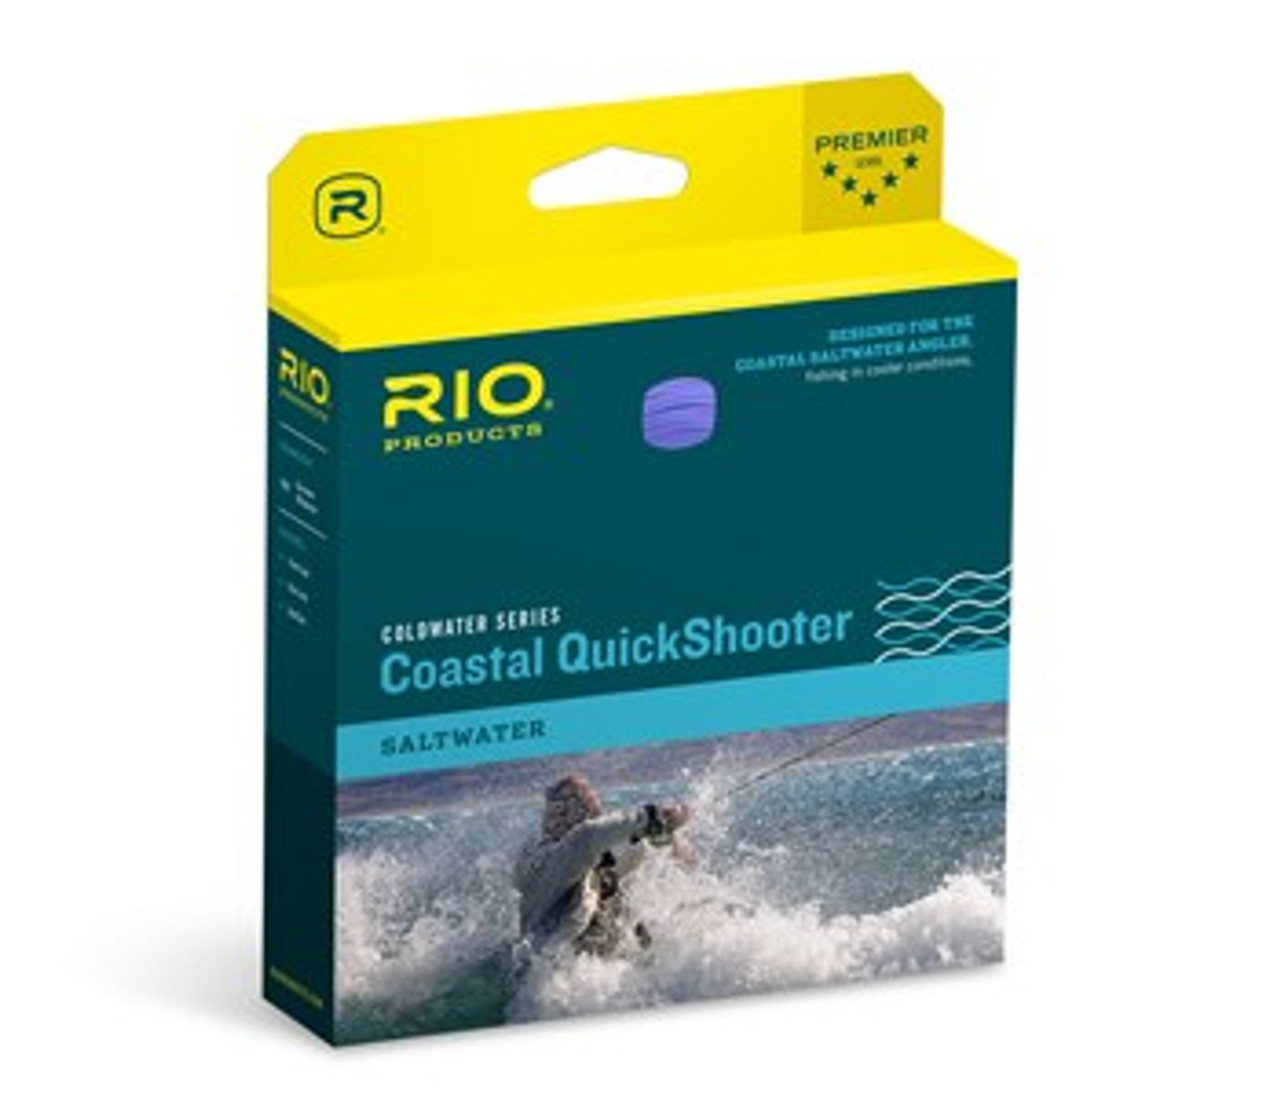 Rio Saltwater Coastal Quick Shooter Fly Line - Tackle World Adelaide Metro